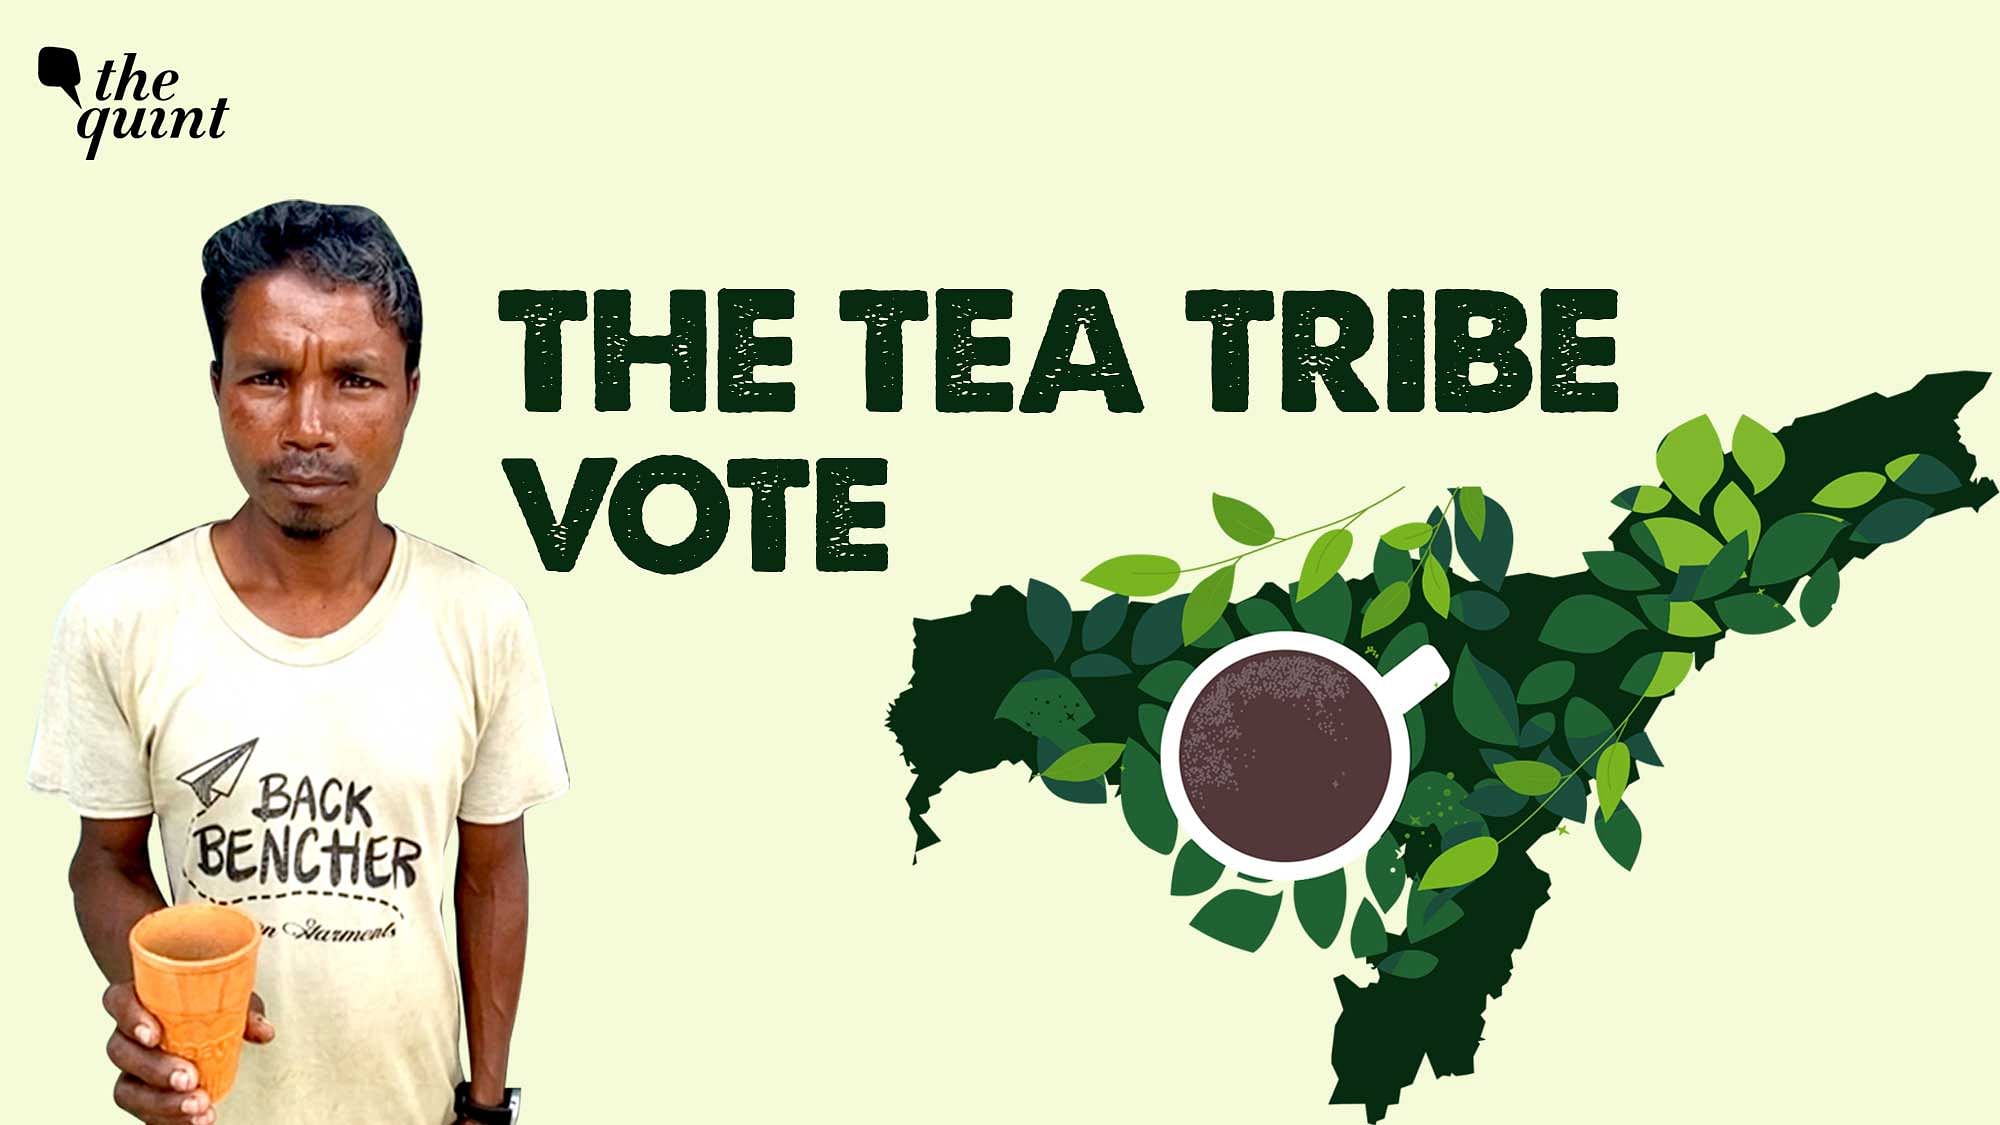 For decades, the tea tribes of Assam have been suffering from low wages and poor living conditions.